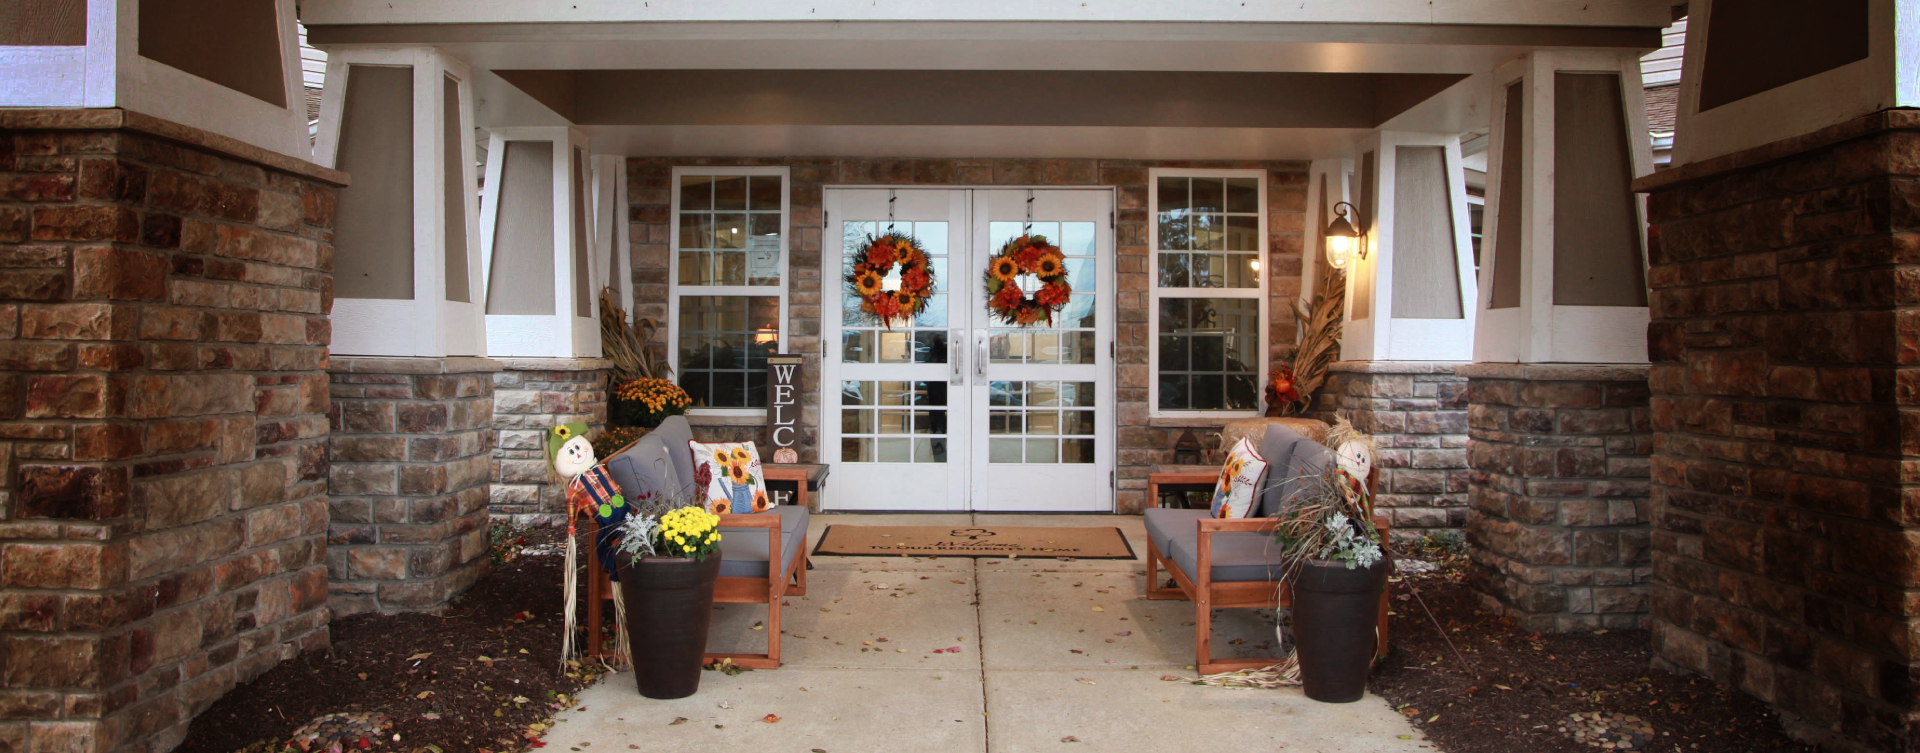 Relax in your favorite chair on the porch at Bickford of St. Charles